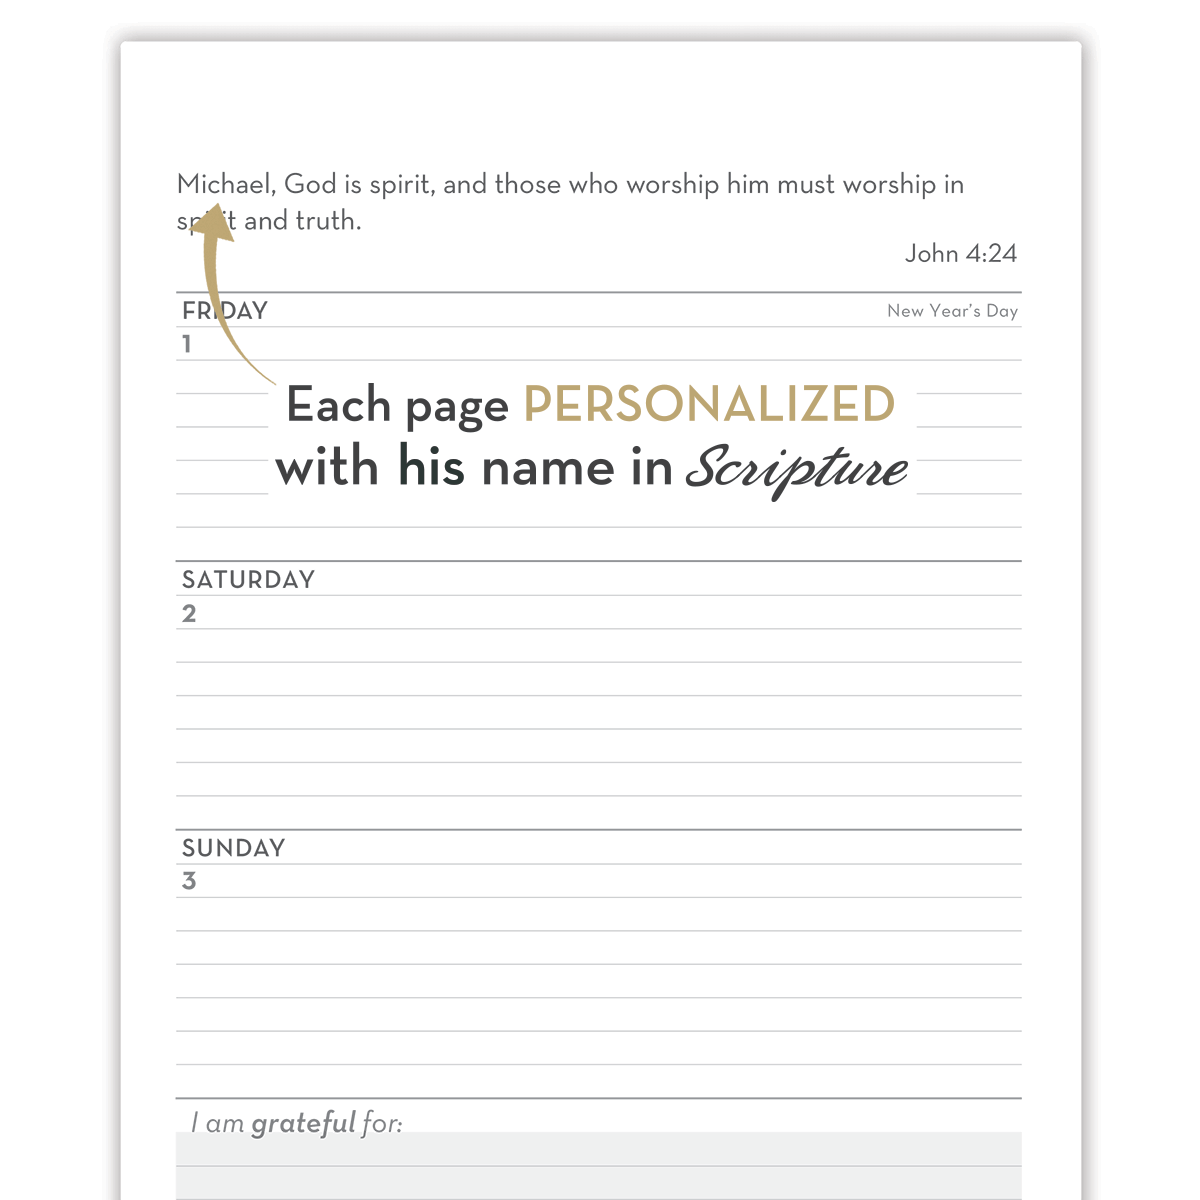 christian wedding gifts, christian gifts for fathers day, christian planner, mens bible planner, personalized scripture journal, devotional planner, christian gift store, christian gift ideas, christian friendship gifts, personalized christian gifts, prayer planners, best planner 2022, bible planner 2022